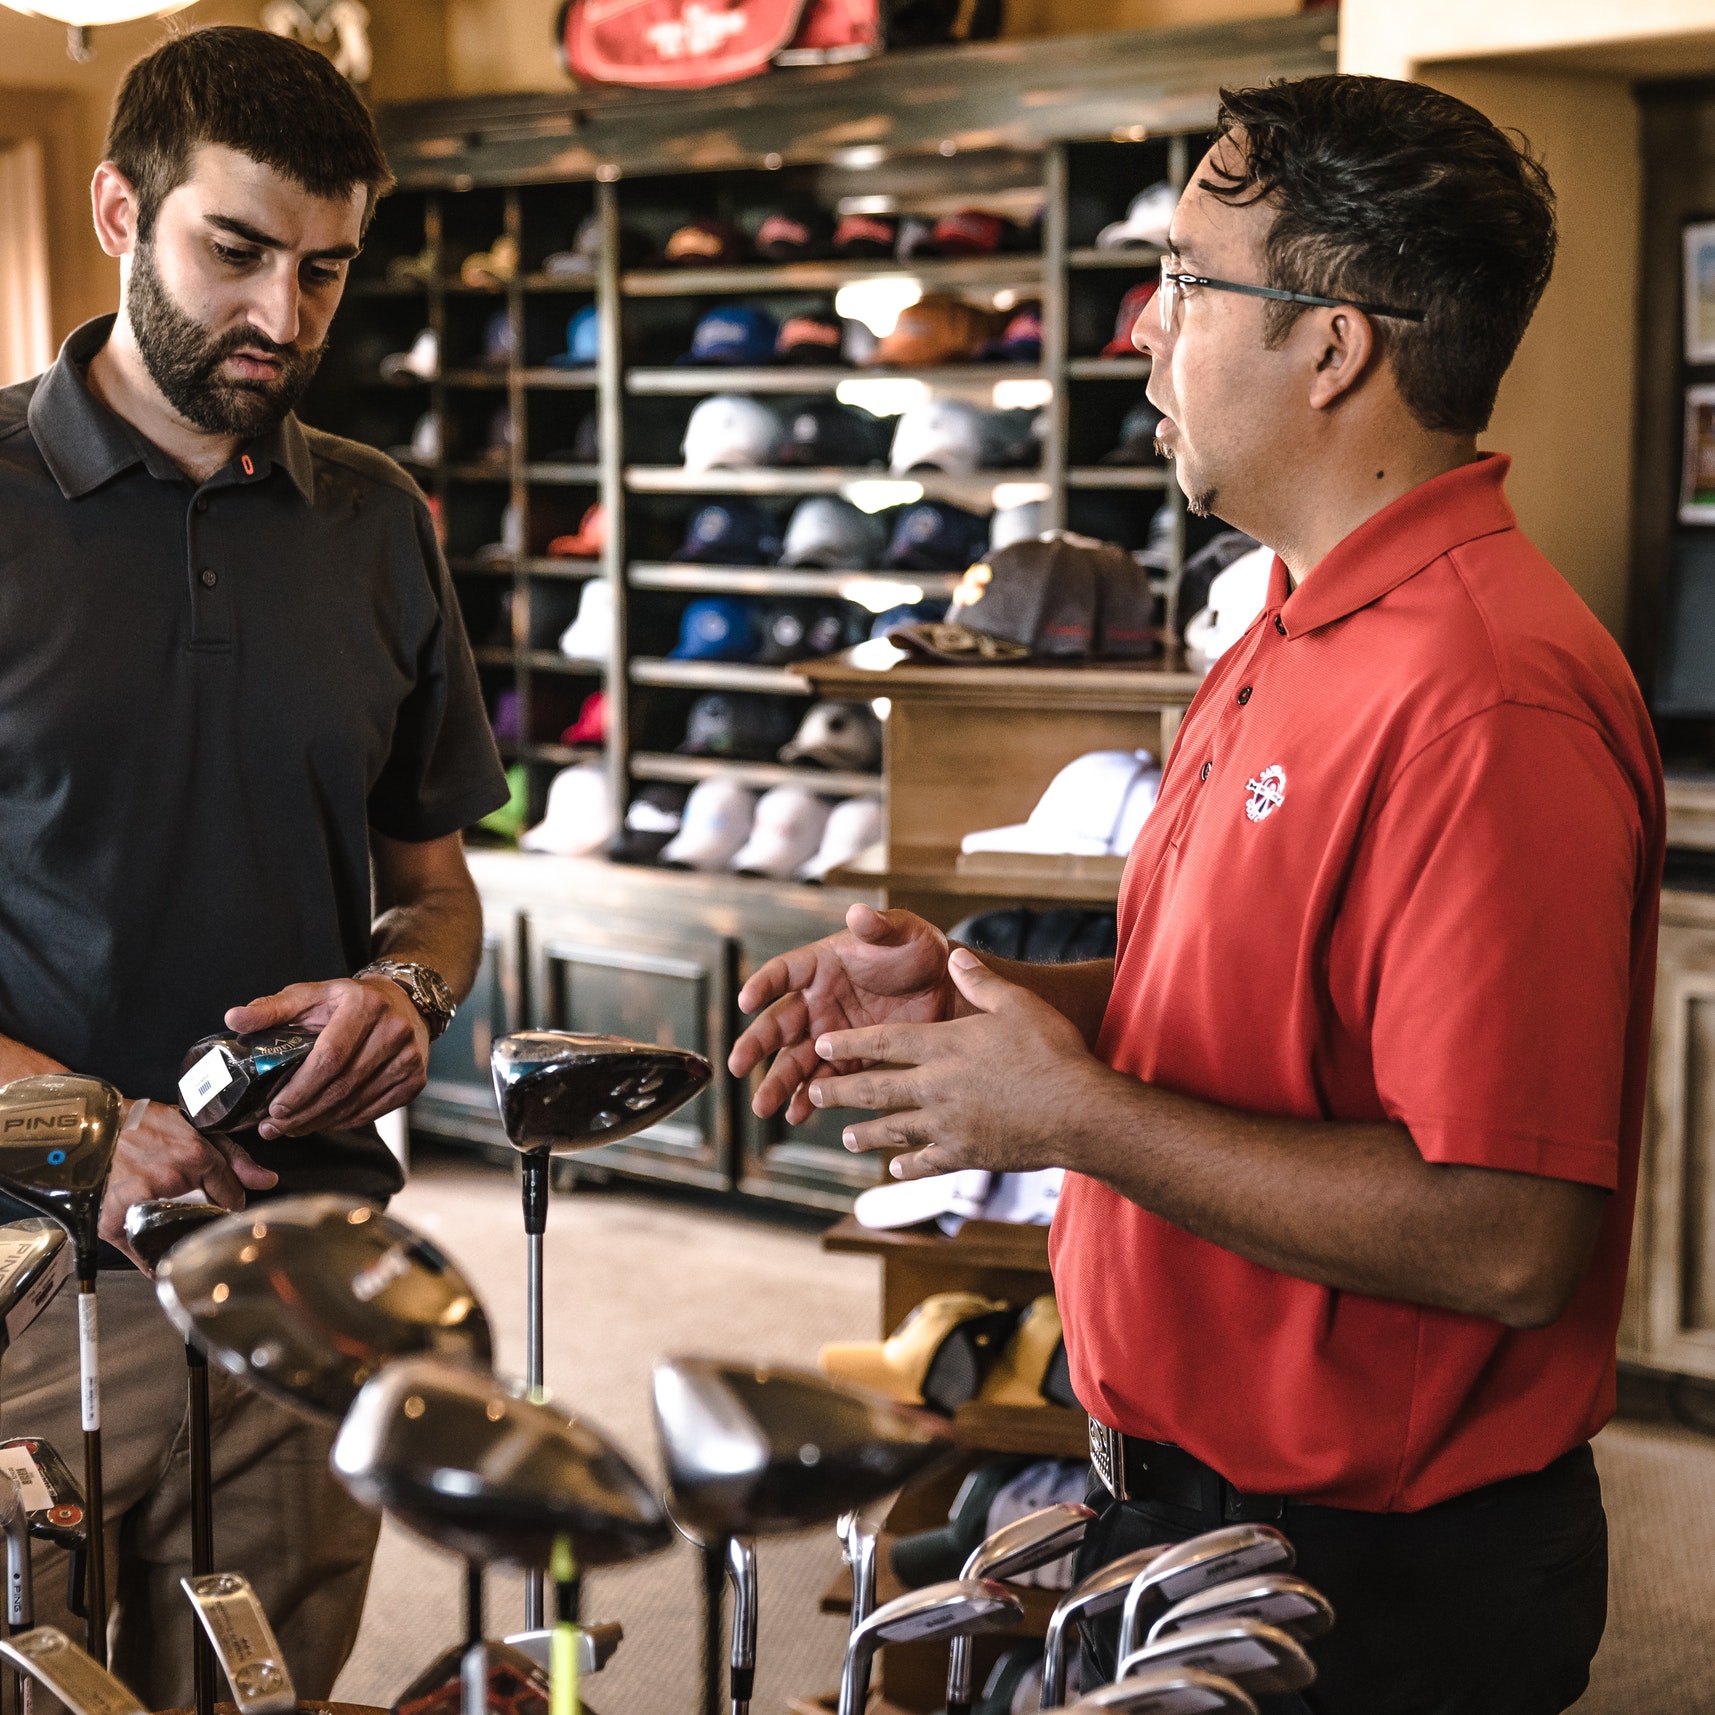 A salesperson showing a customer different golf clubs in a sporting goods store